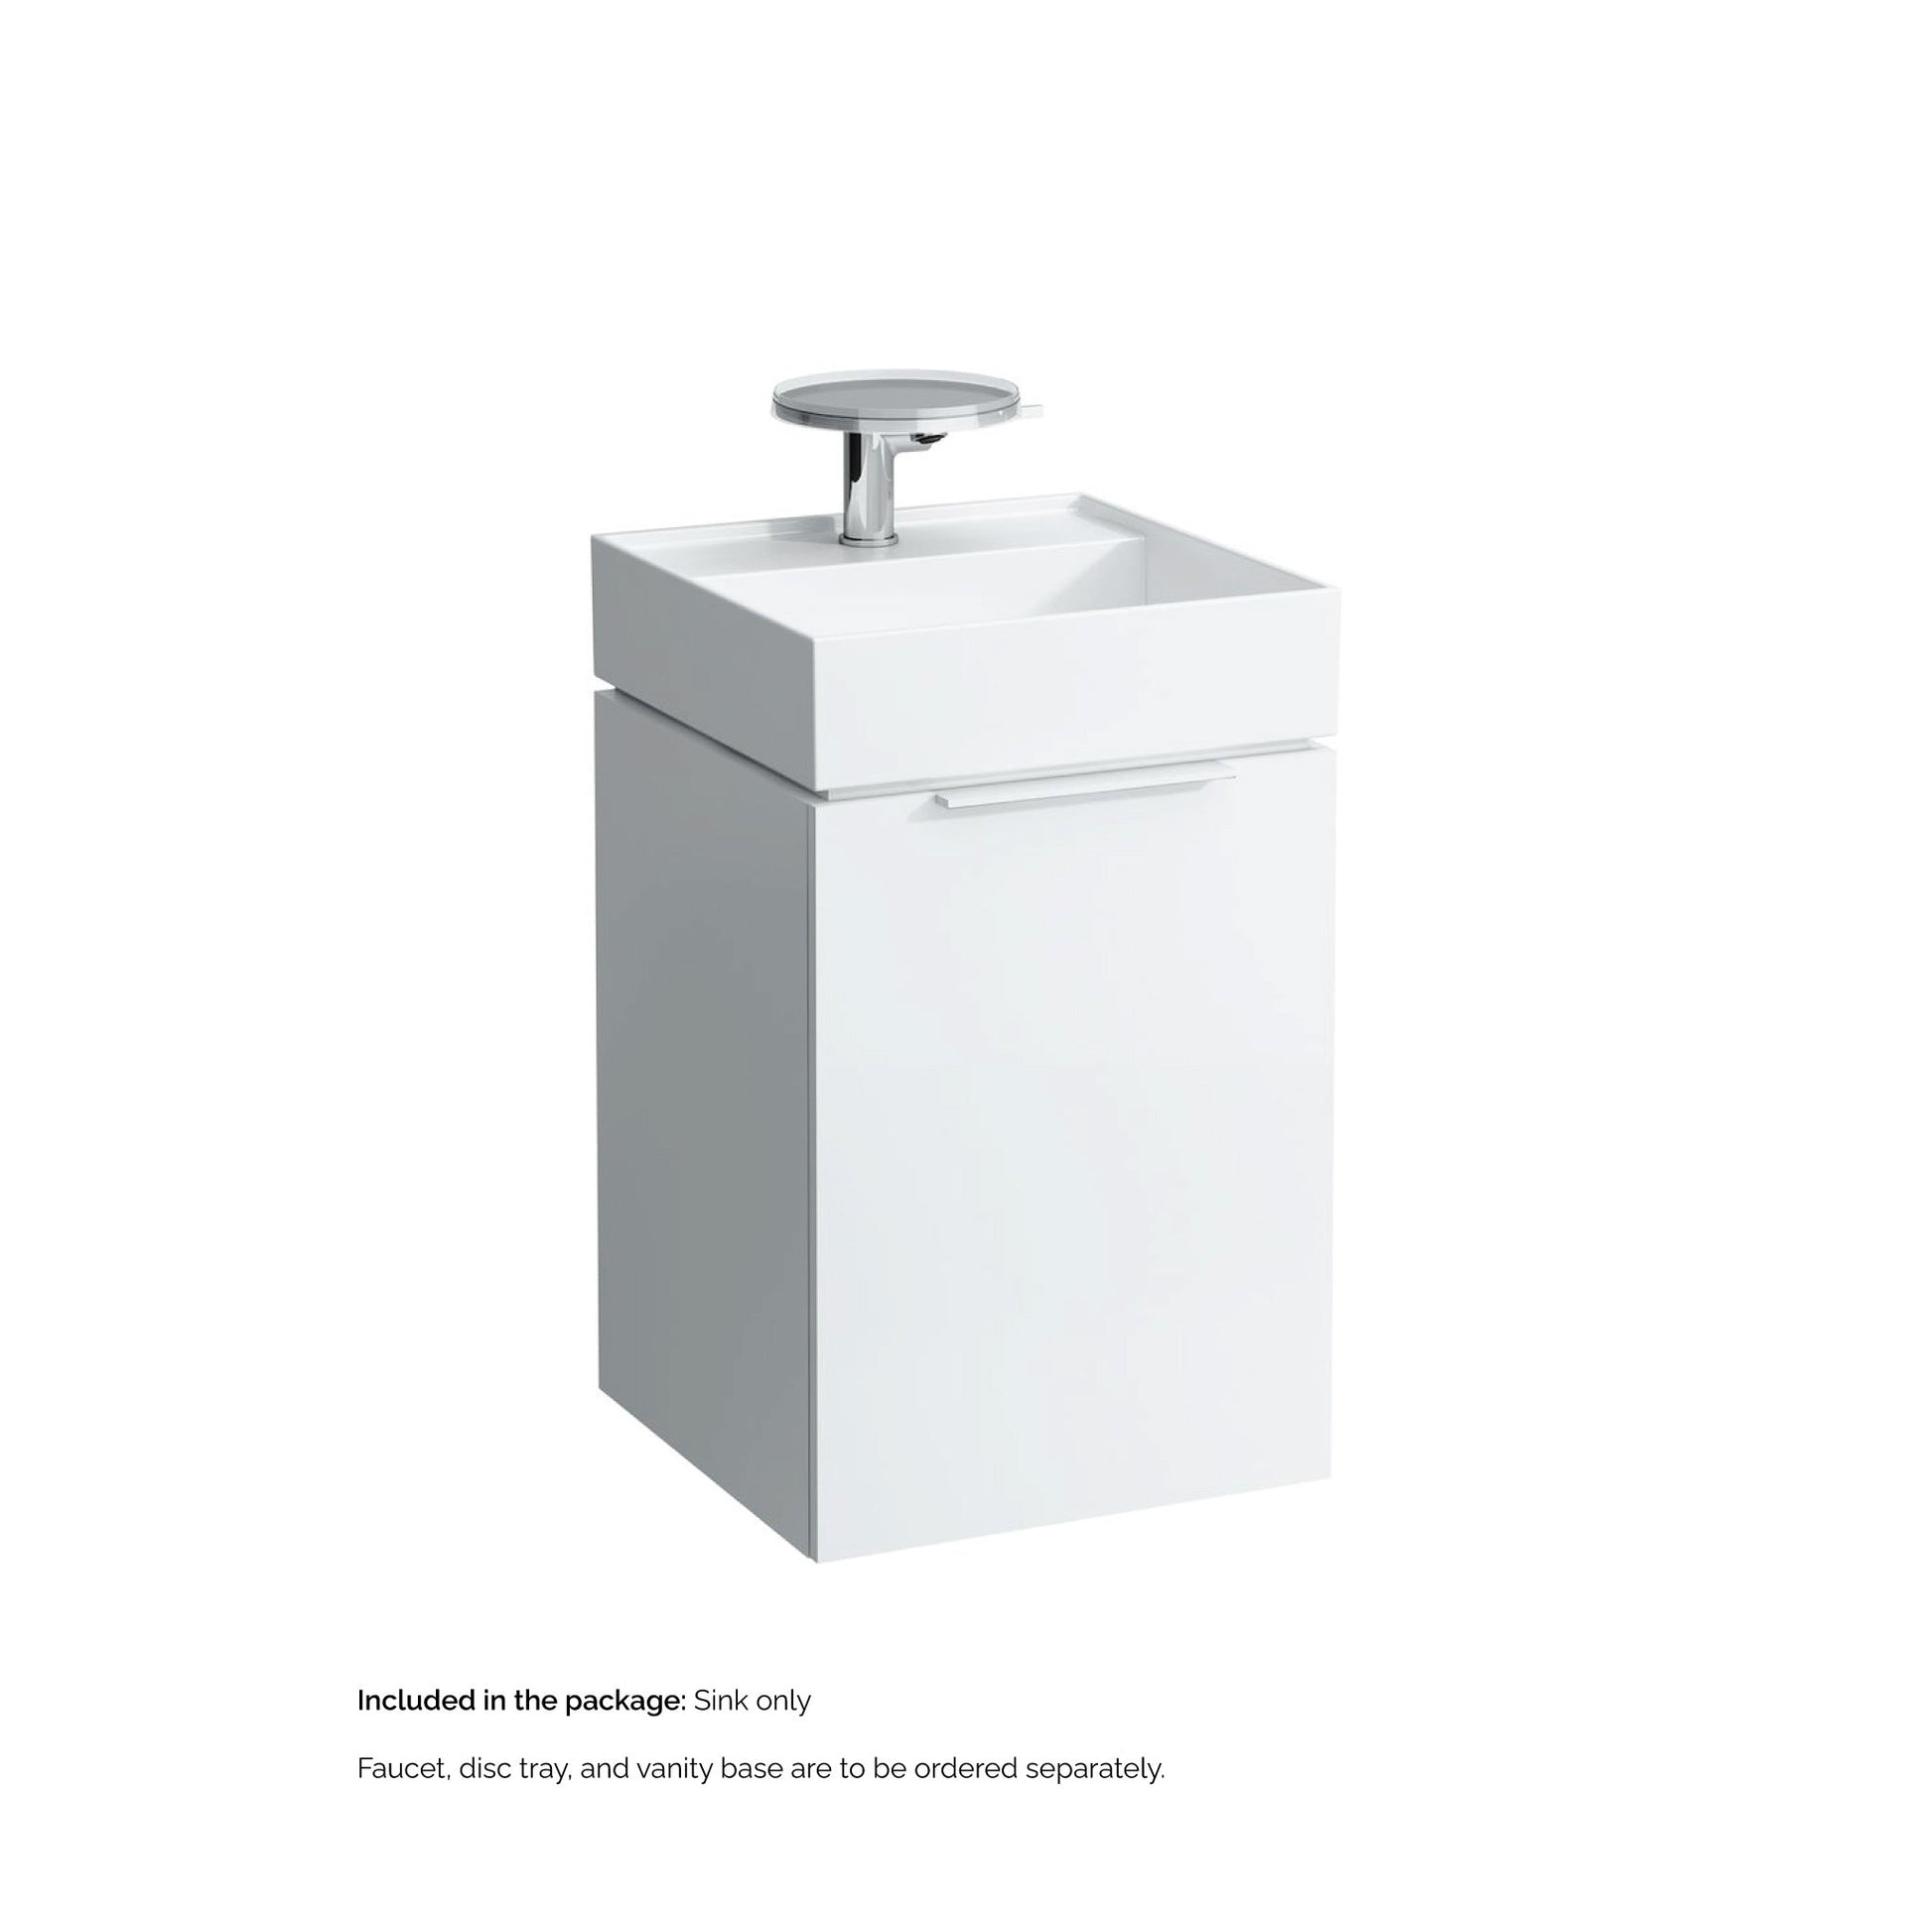 Laufen Kartell 18" x 18" Matte White Wall-Mounted Bathroom Sink With Faucet Hole